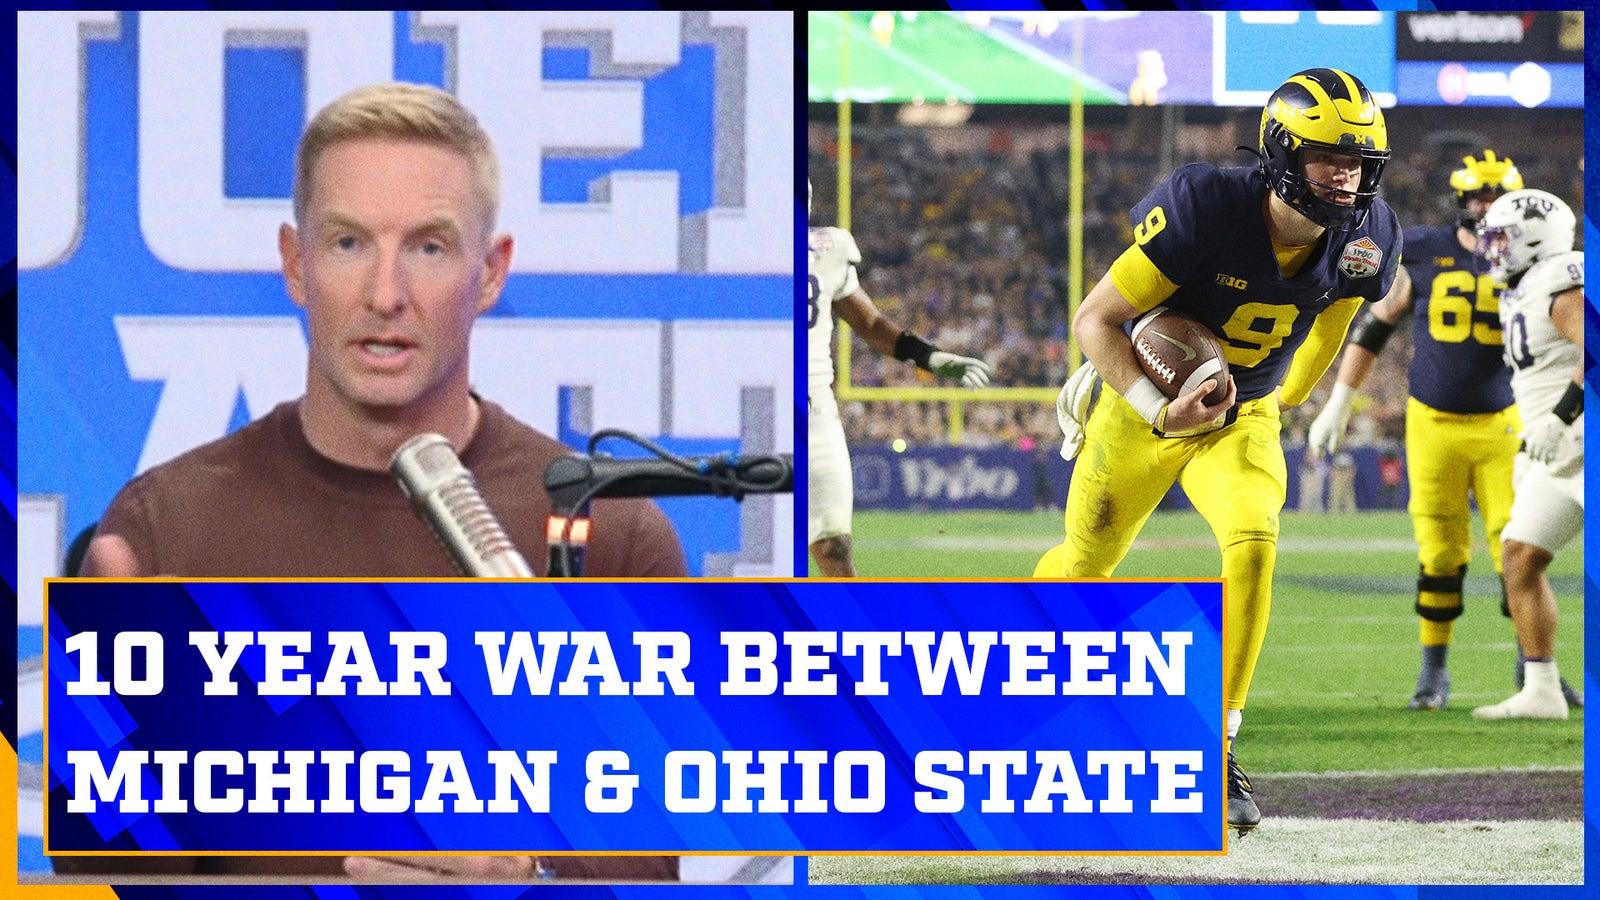 Michigan and Ohio State headed towards another 10-year war?